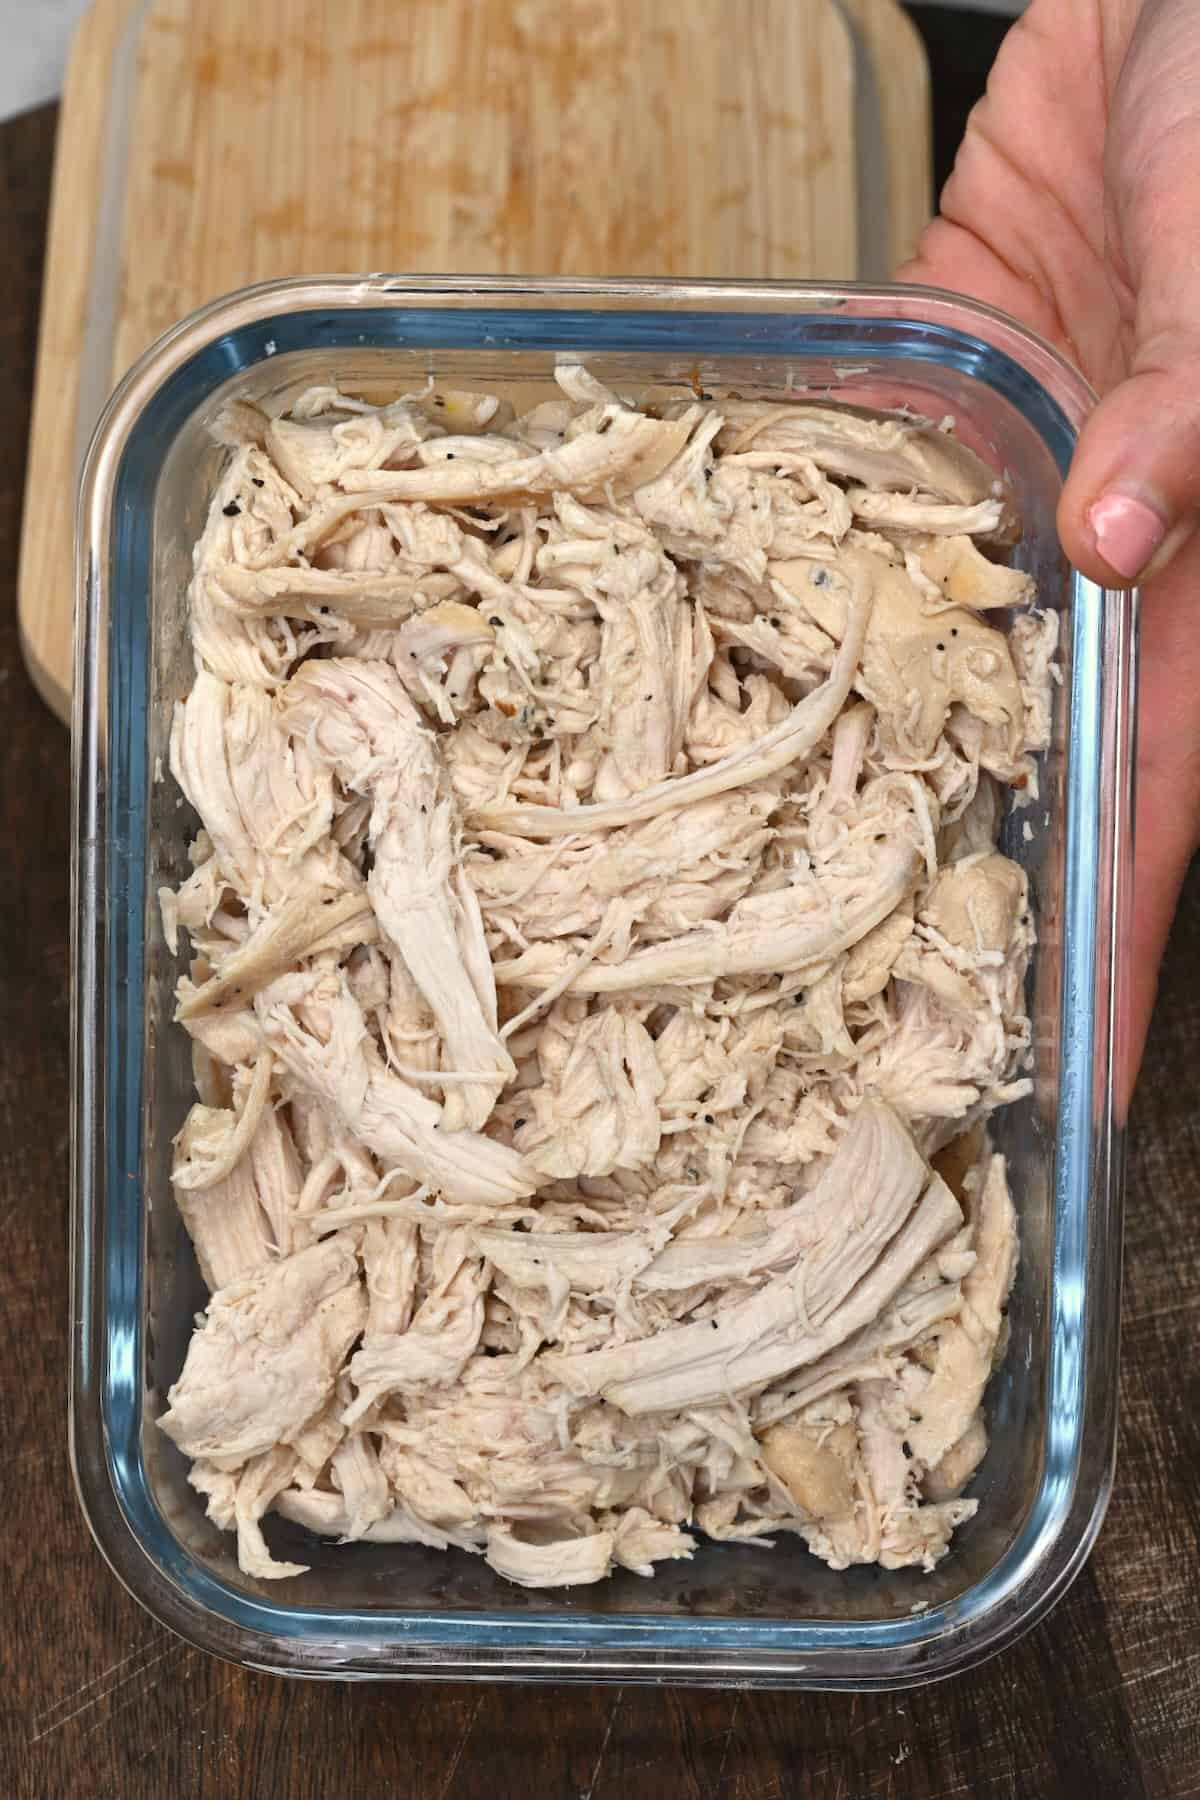 Shredded chicken in a glass container ready to store